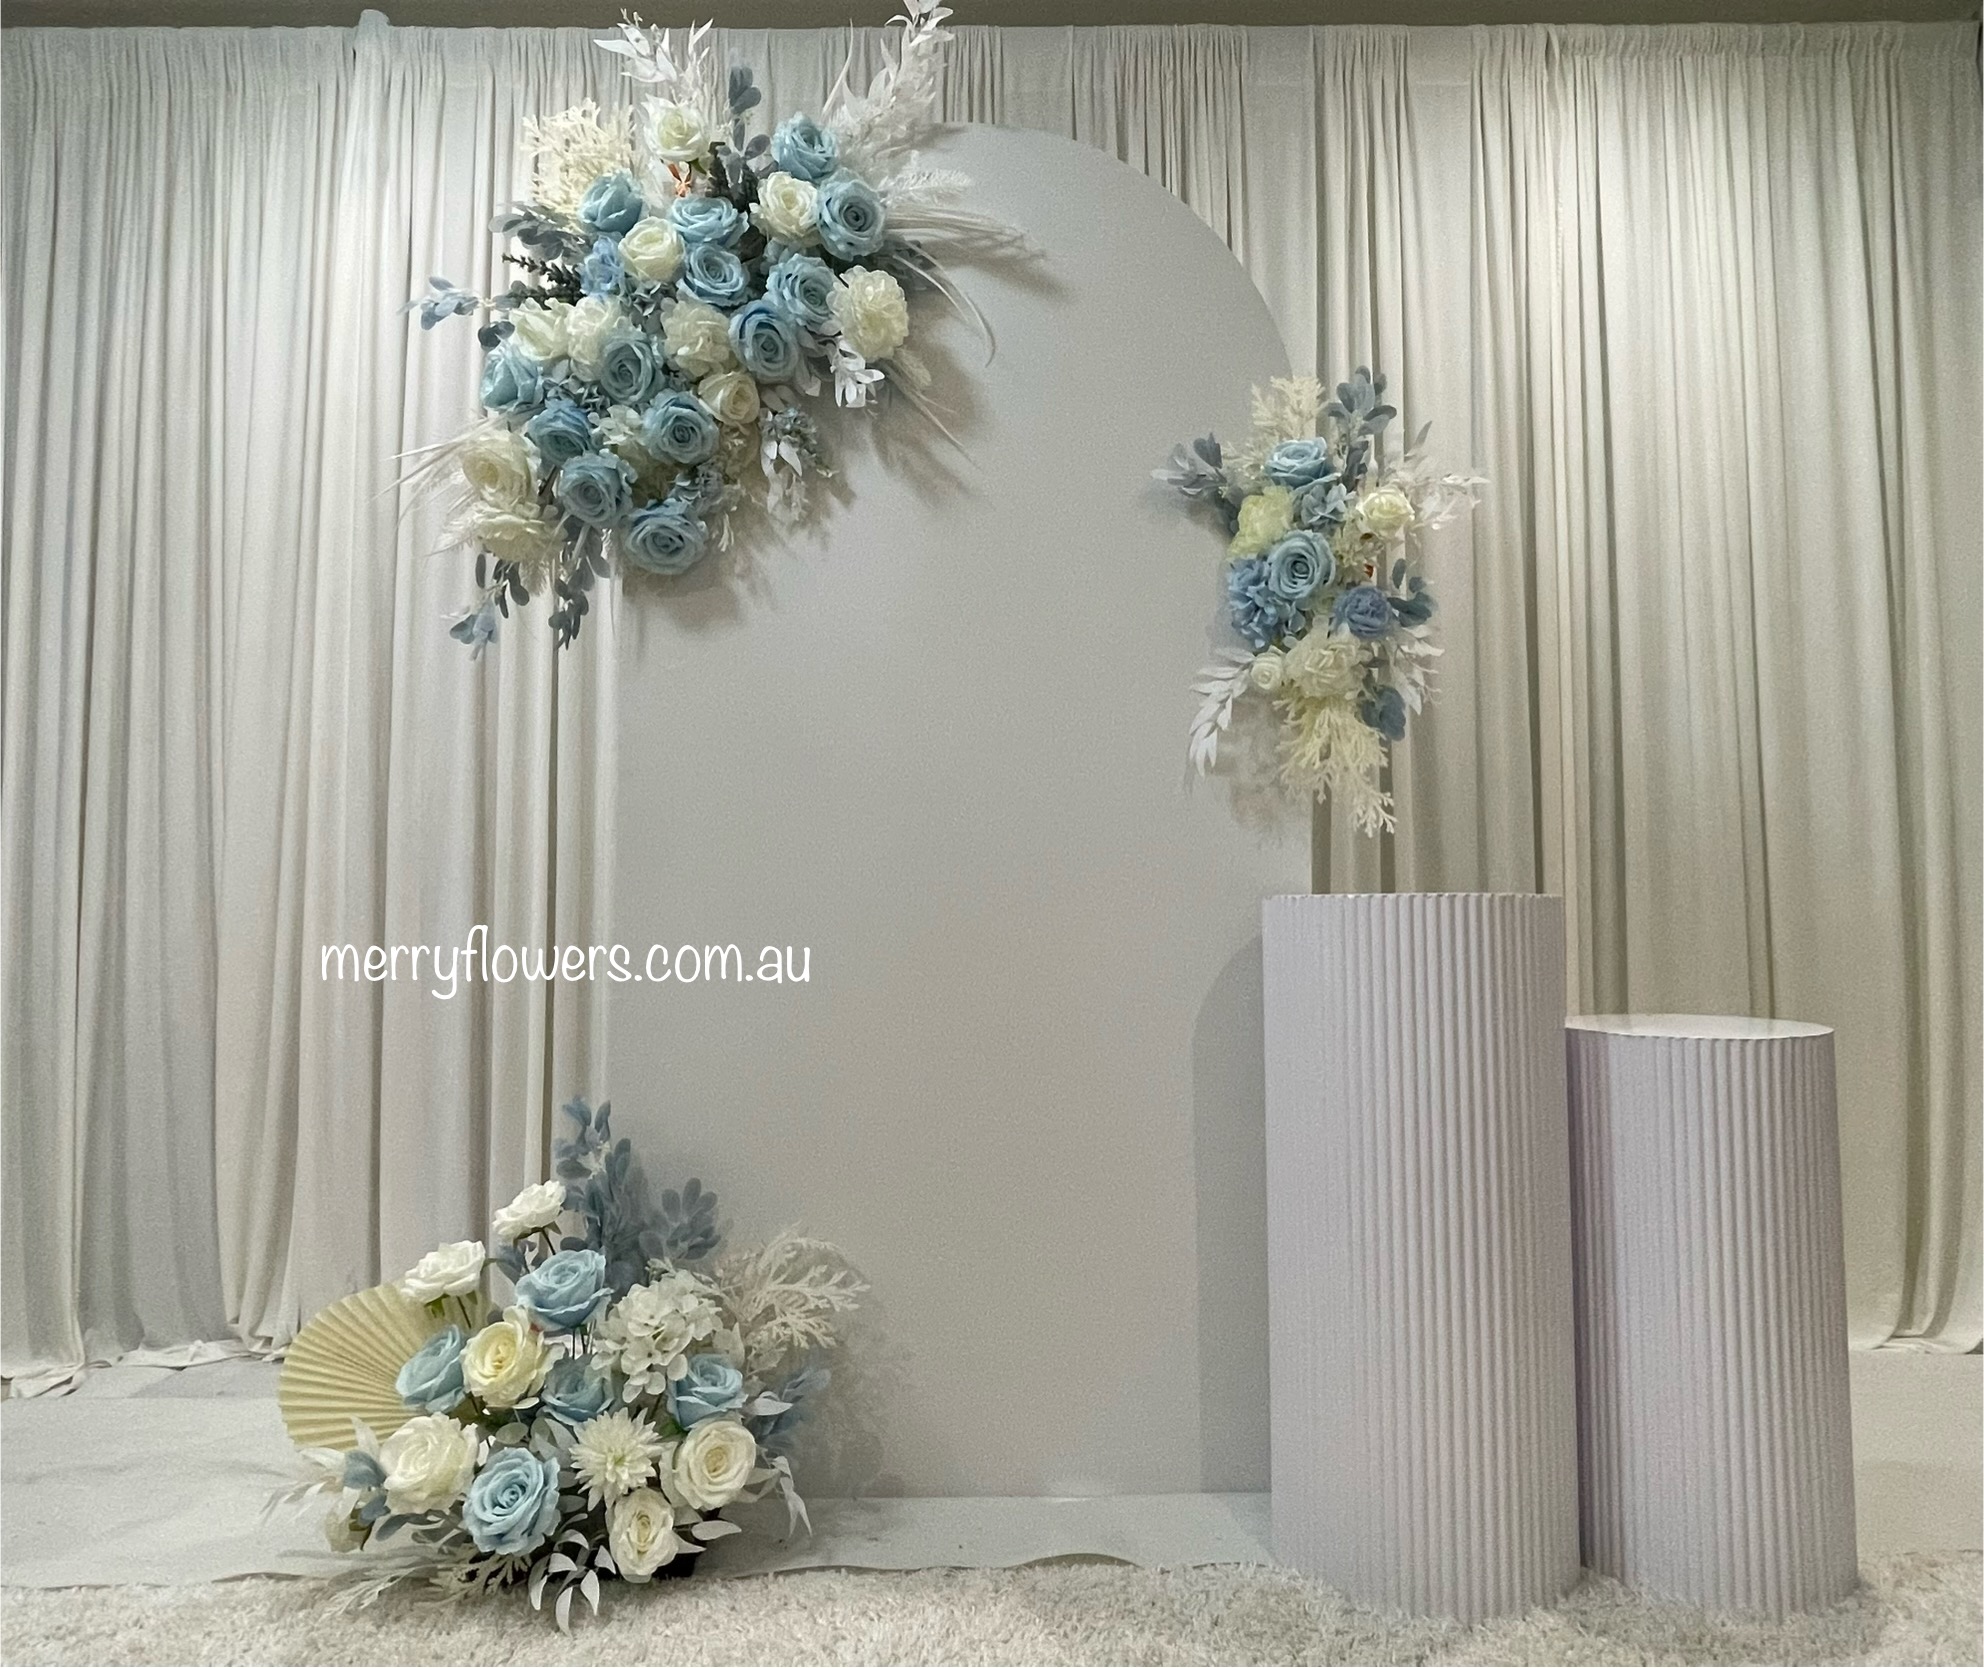 A20 – blue flowers with solid arch backdrops